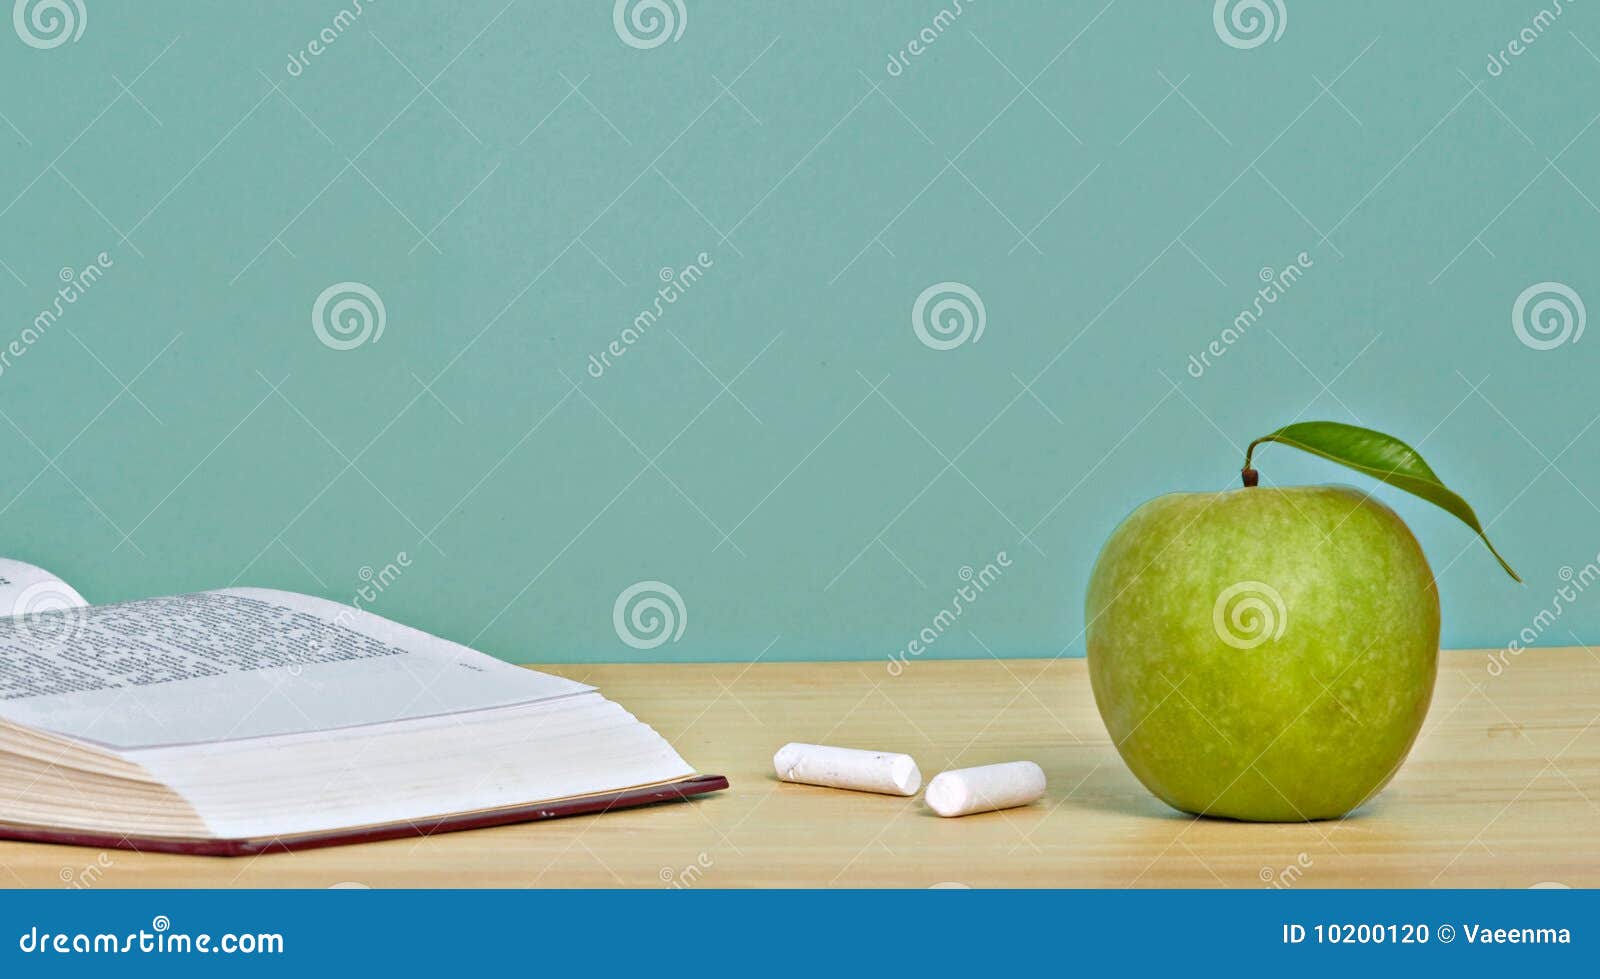 Green apple and open book stock photo. Image of food - 10200120